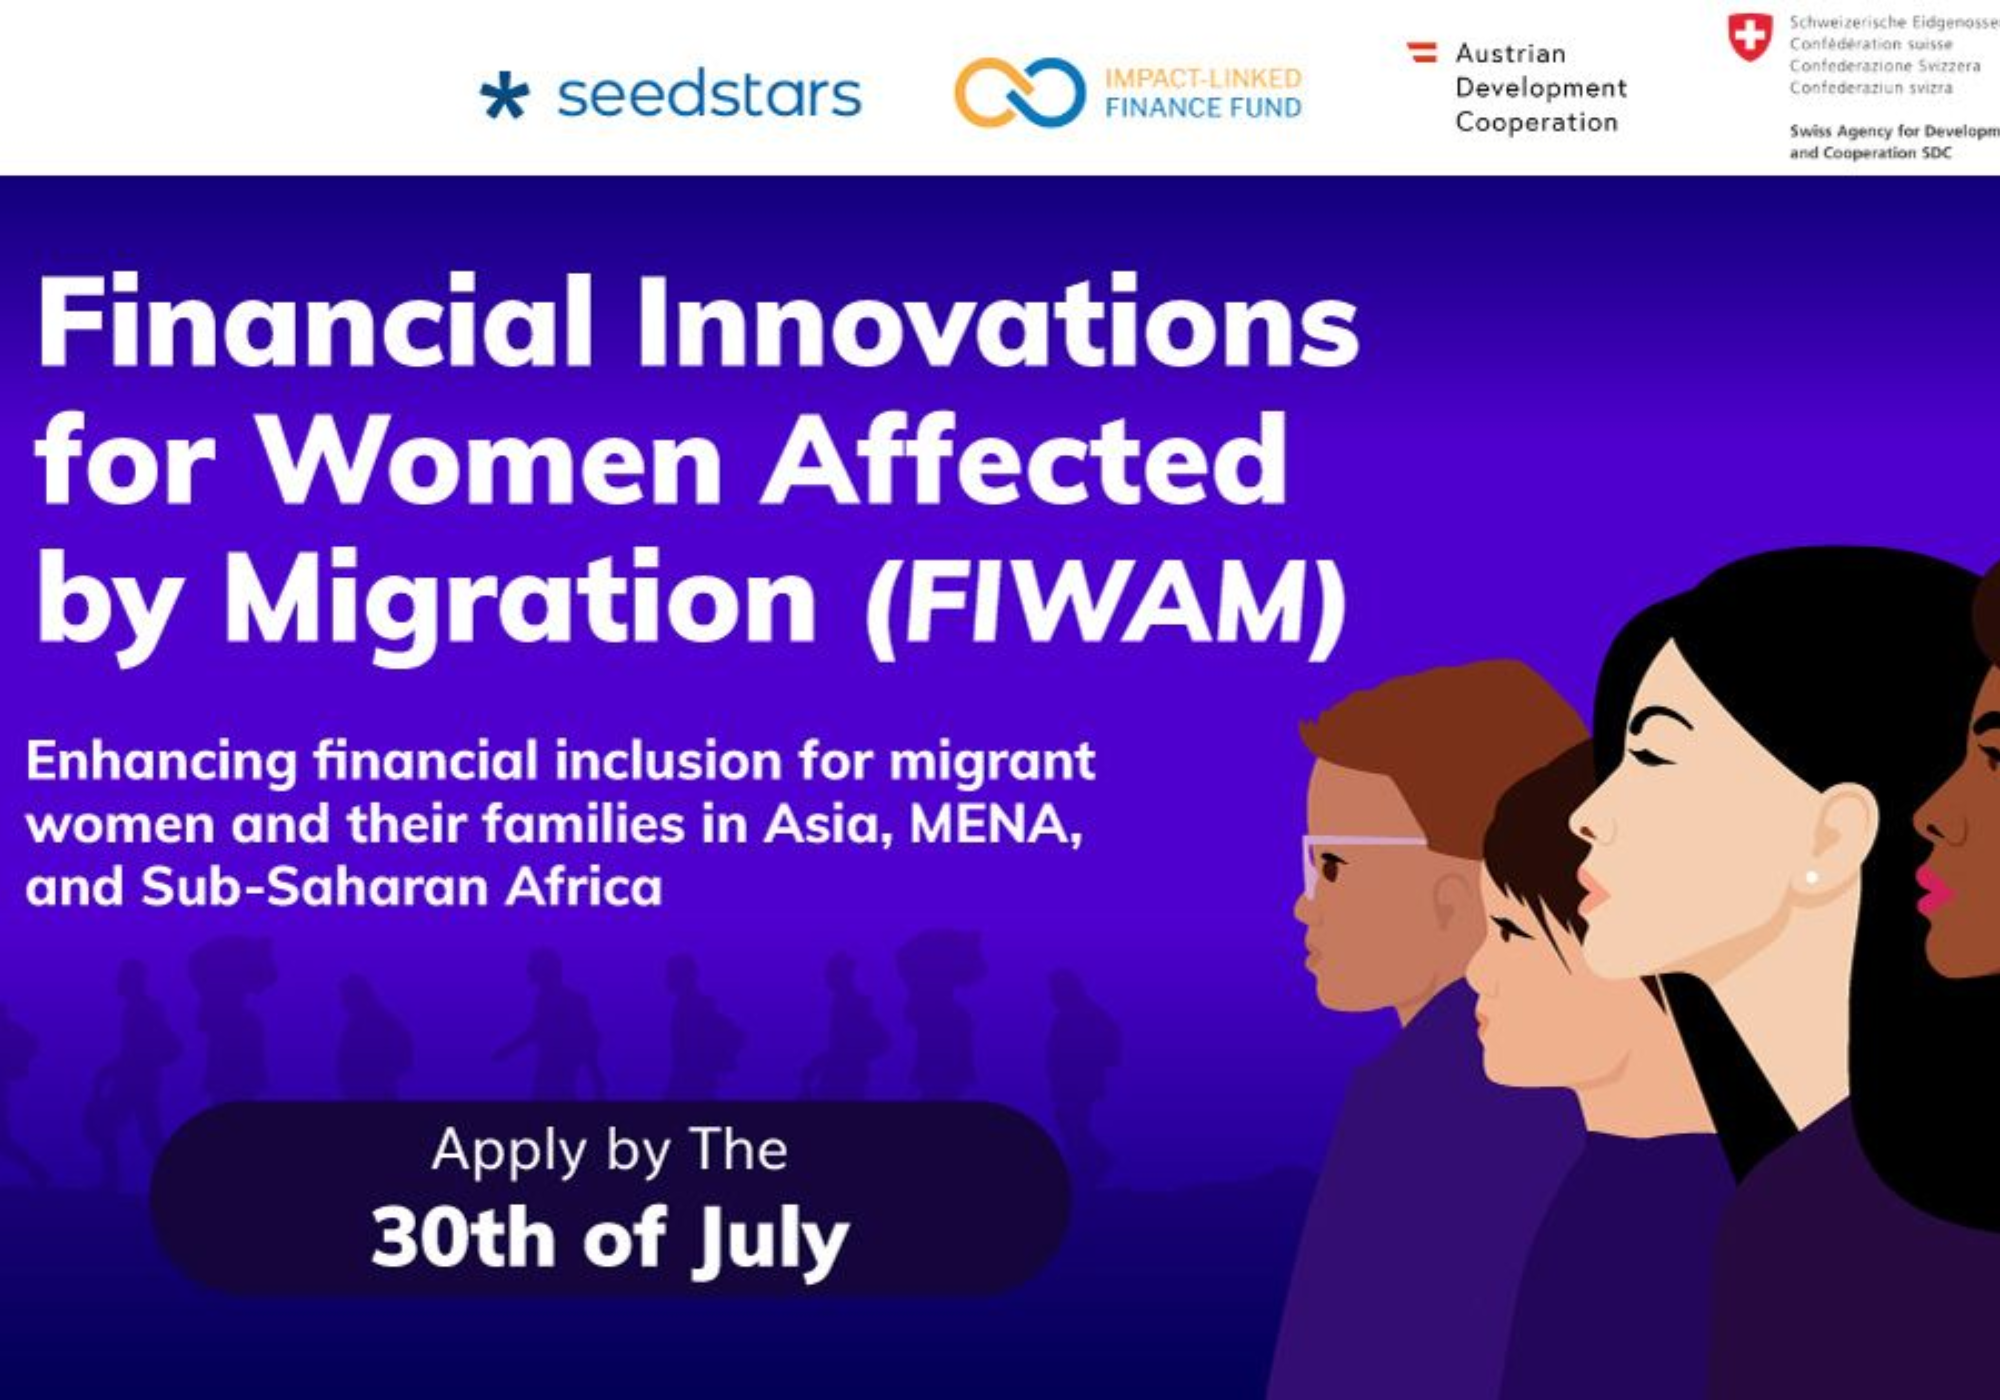 Seedstars Launches FIWAM Program to Drive Financial Inclusion For Women Migrants